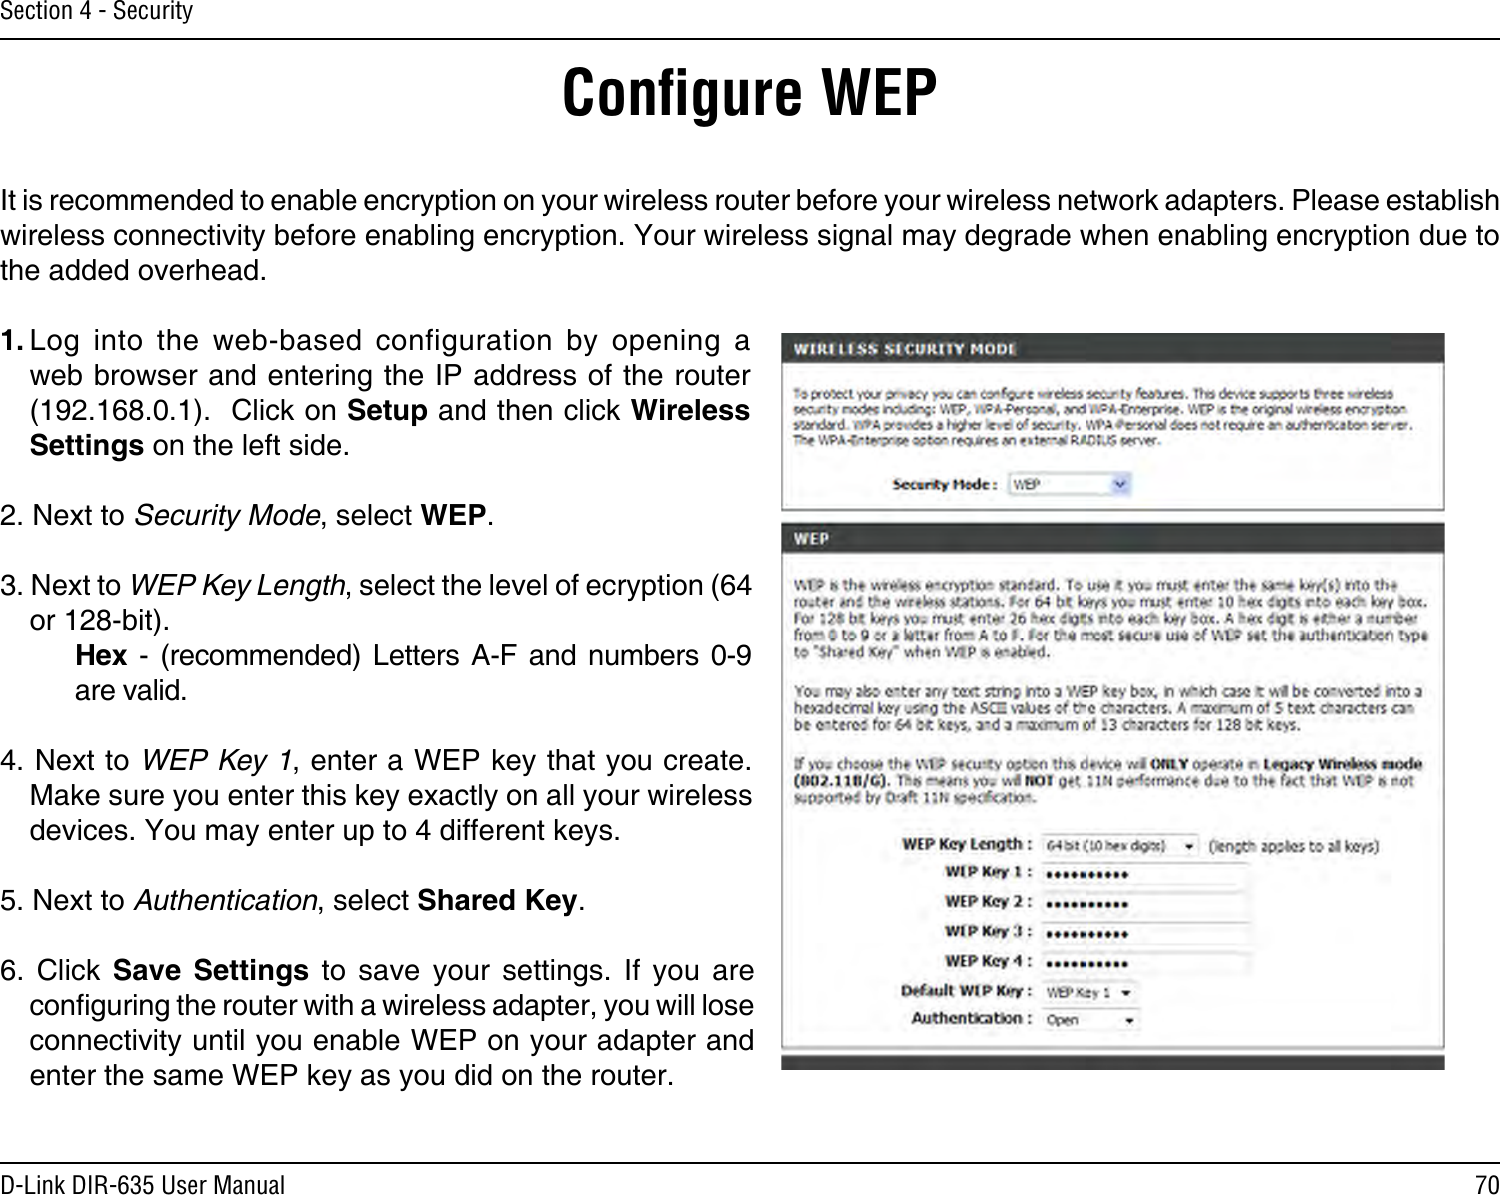 70D-Link DIR-635 User ManualSection 4 - SecurityConﬁgure WEPIt is recommended to enable encryption on your wireless router before your wireless network adapters. Please establish wireless connectivity before enabling encryption. Your wireless signal may degrade when enabling encryption due to the added overhead.1. Log  into  the  web-based  configuration  by  opening  a web browser and entering the IP address of the router (192.168.0.1).  Click on Setup and then click Wireless Settings on the left side.2. Next to Security Mode, select WEP.3. Next to WEP Key Length, select the level of ecryption (64 or 128-bit).    Hex  -  (recommended)  Letters  A-F and  numbers  0-9    are valid.   4. Next to WEP Key 1, enter a WEP key that you create. Make sure you enter this key exactly on all your wireless devices. You may enter up to 4 different keys.5. Next to Authentication, select Shared Key.6.  Click  Save  Settings  to  save  your  settings.  If  you  are conguring the router with a wireless adapter, you will lose connectivity until you enable WEP on your adapter and enter the same WEP key as you did on the router.